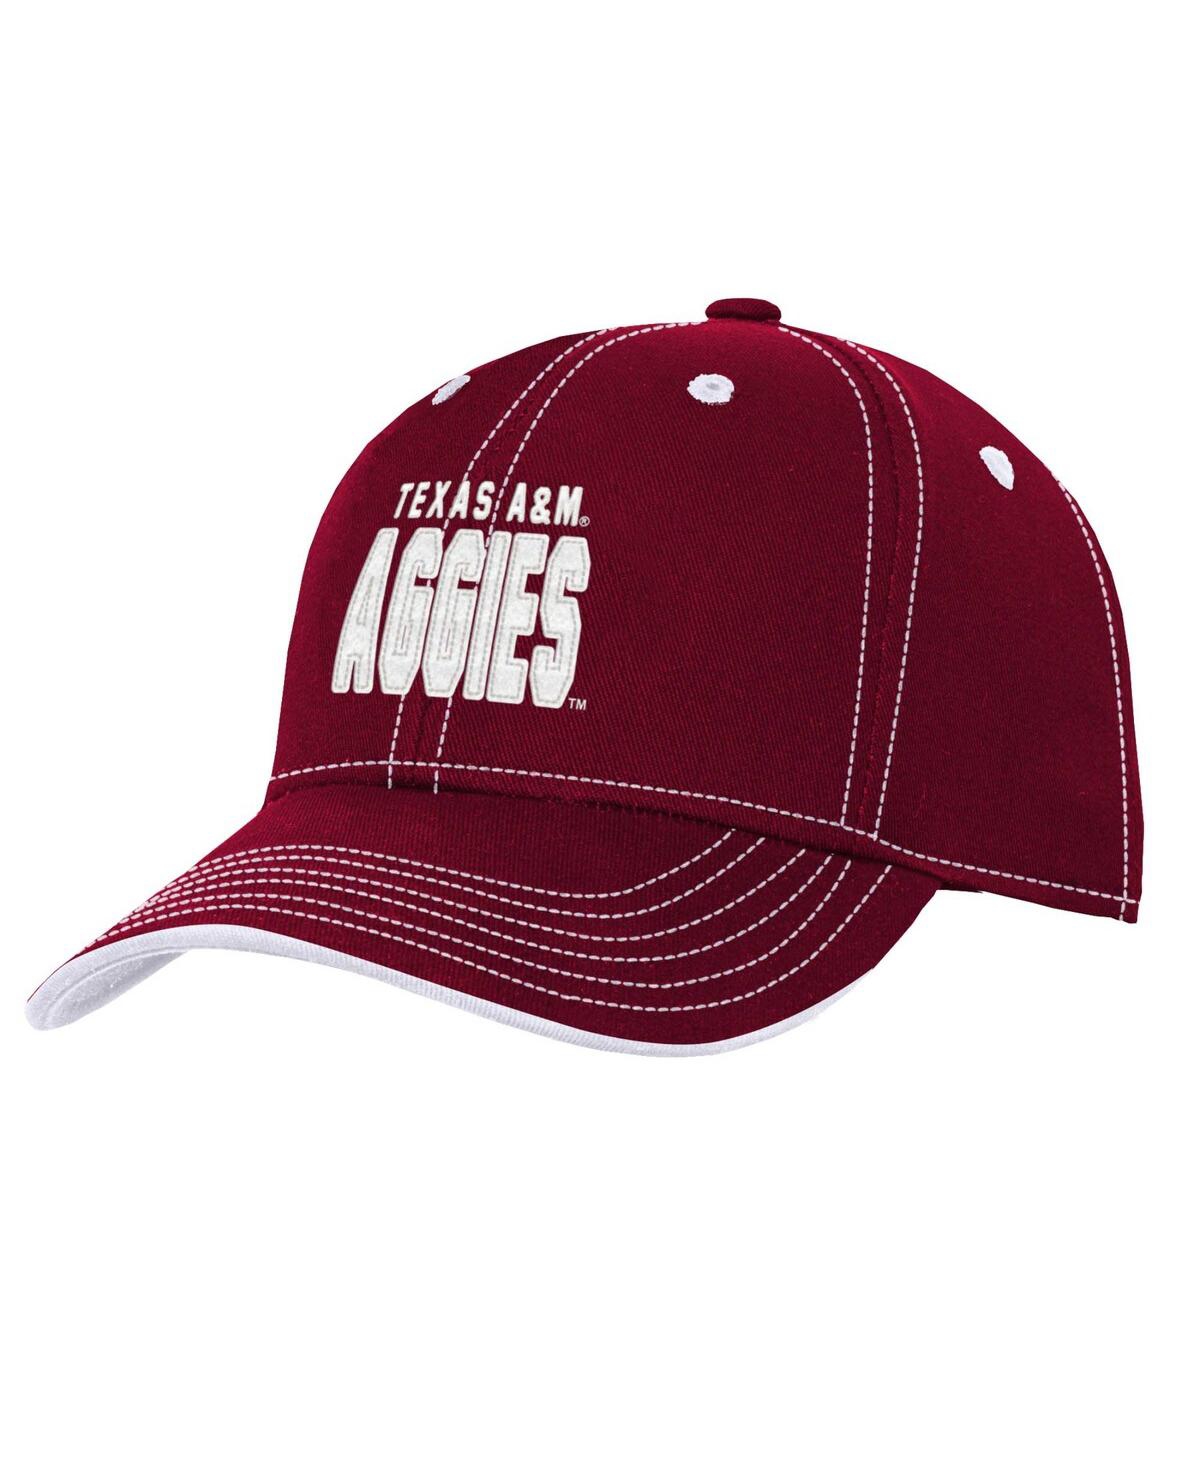 Outerstuff Kids' Big Boys And Girls Maroon Texas A&m Aggies Old School Slouch Adjustable Hat